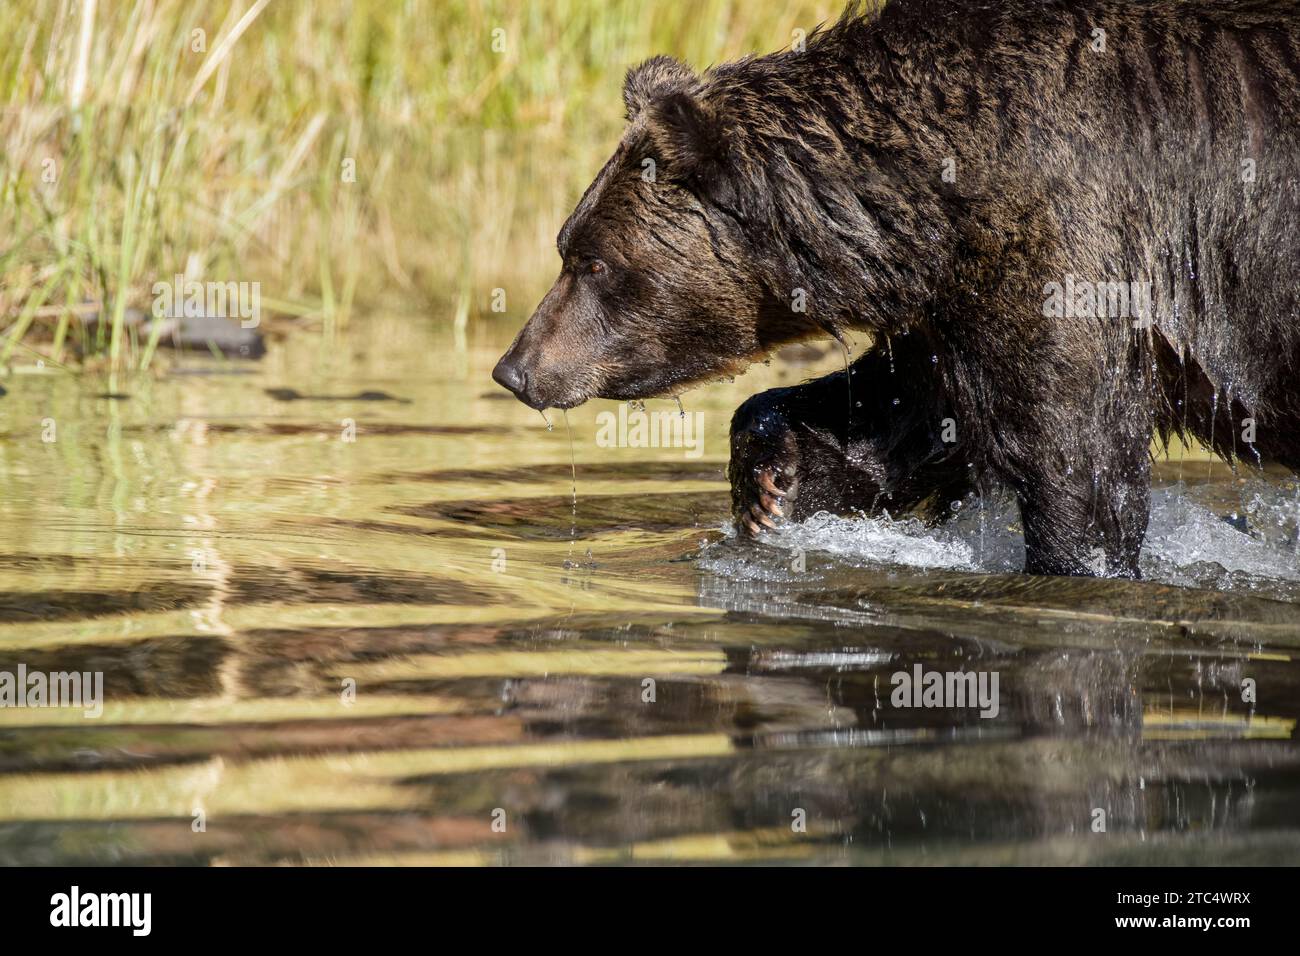 Grizzly bear on the prowl, Chilko River, BC Stock Photo